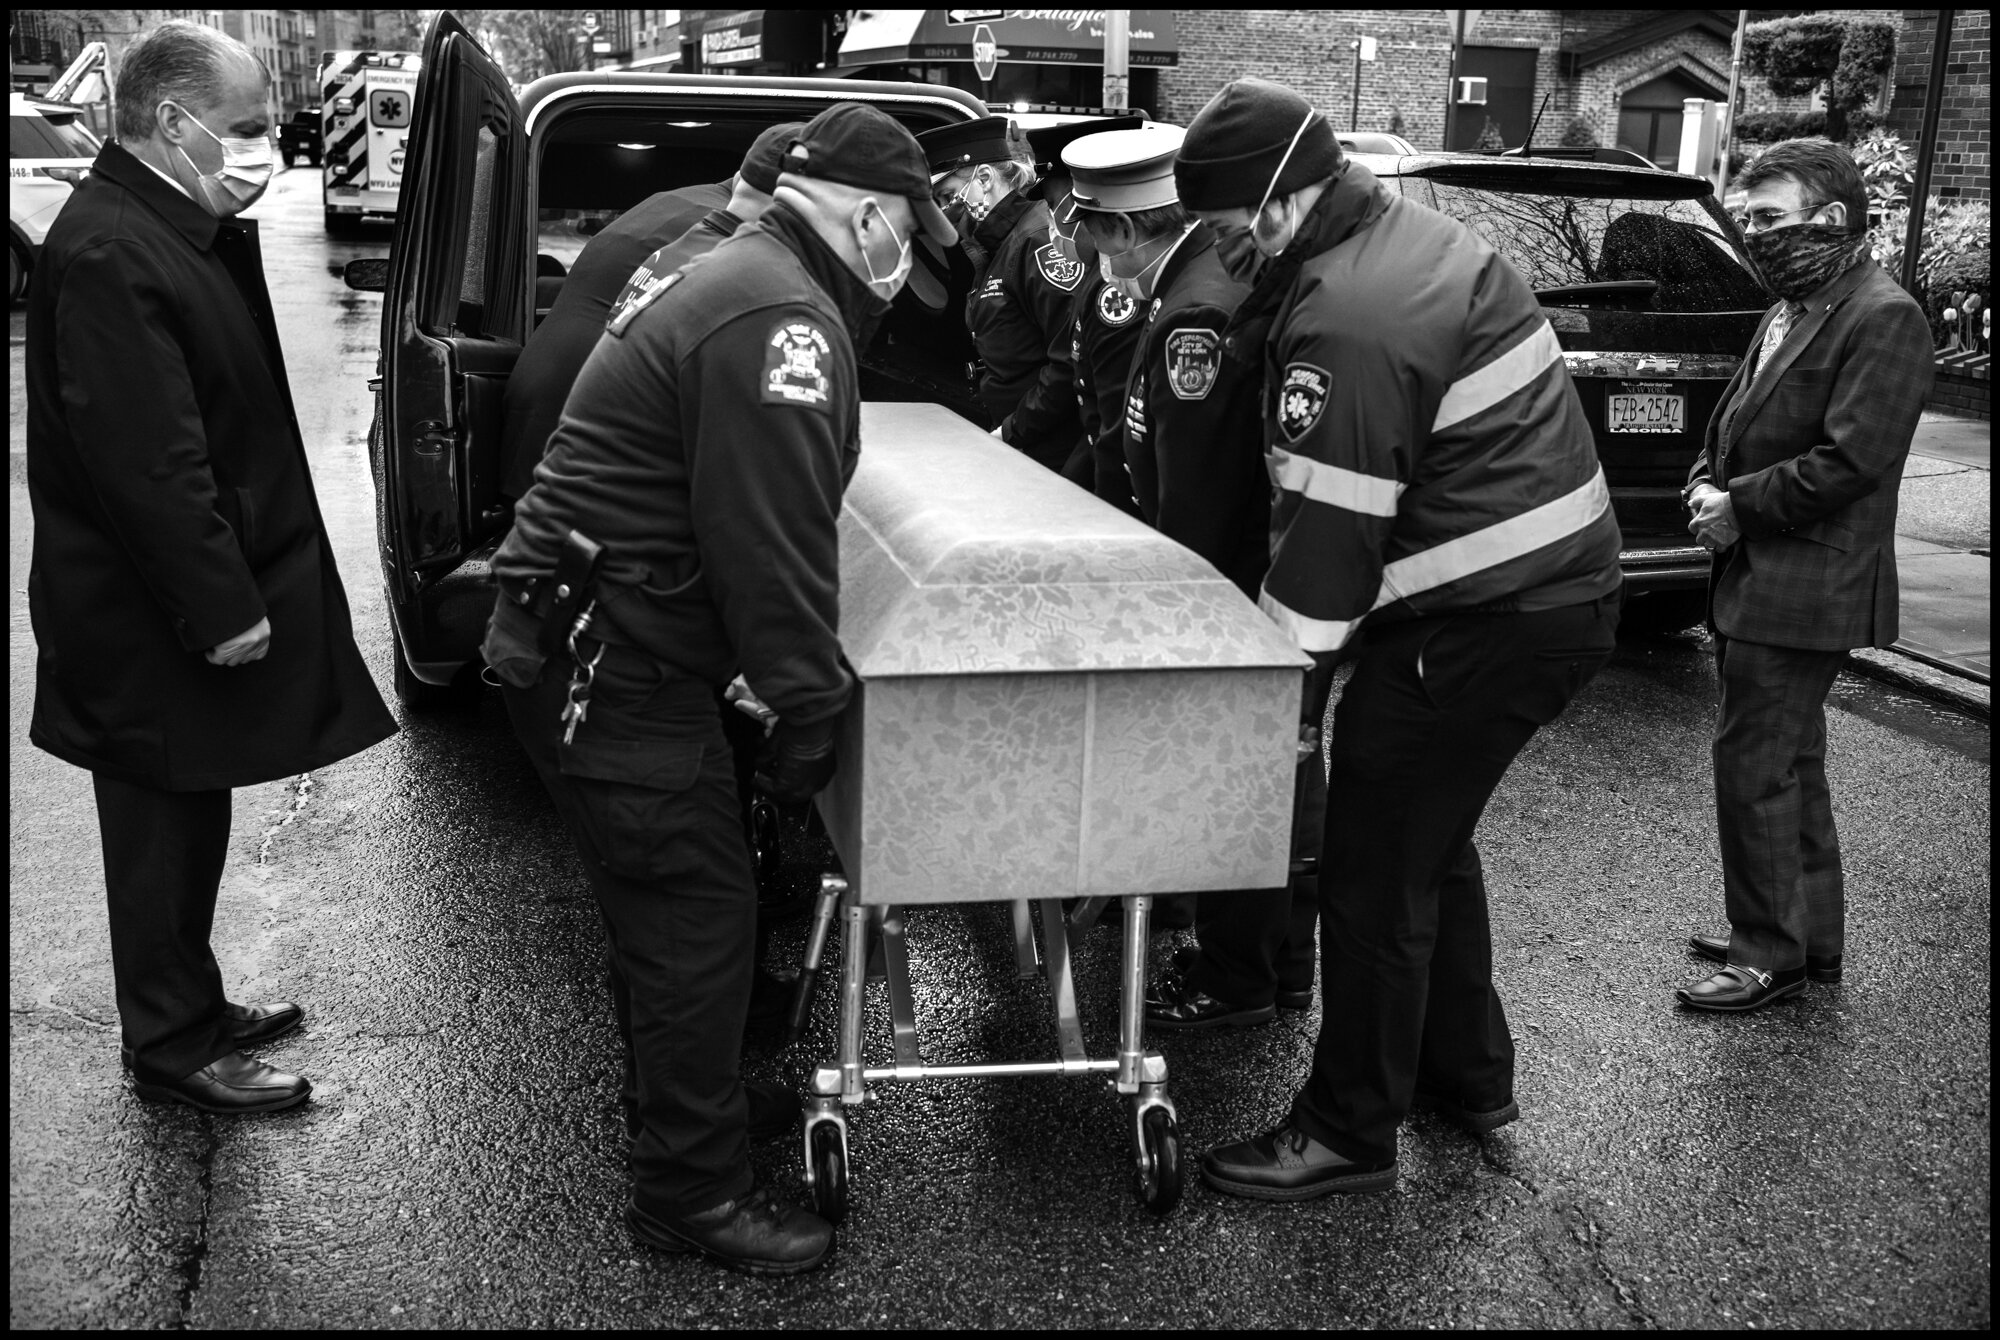  A funeral ceremony for Anthony “Tony” Thomas-a legendary Paramedic in the New York City area, who died of Covid-19 related causes. Bay Ridge, Brooklyn, New York.  April 30, 2020. © Peter Turnley.   ID# 55-001 